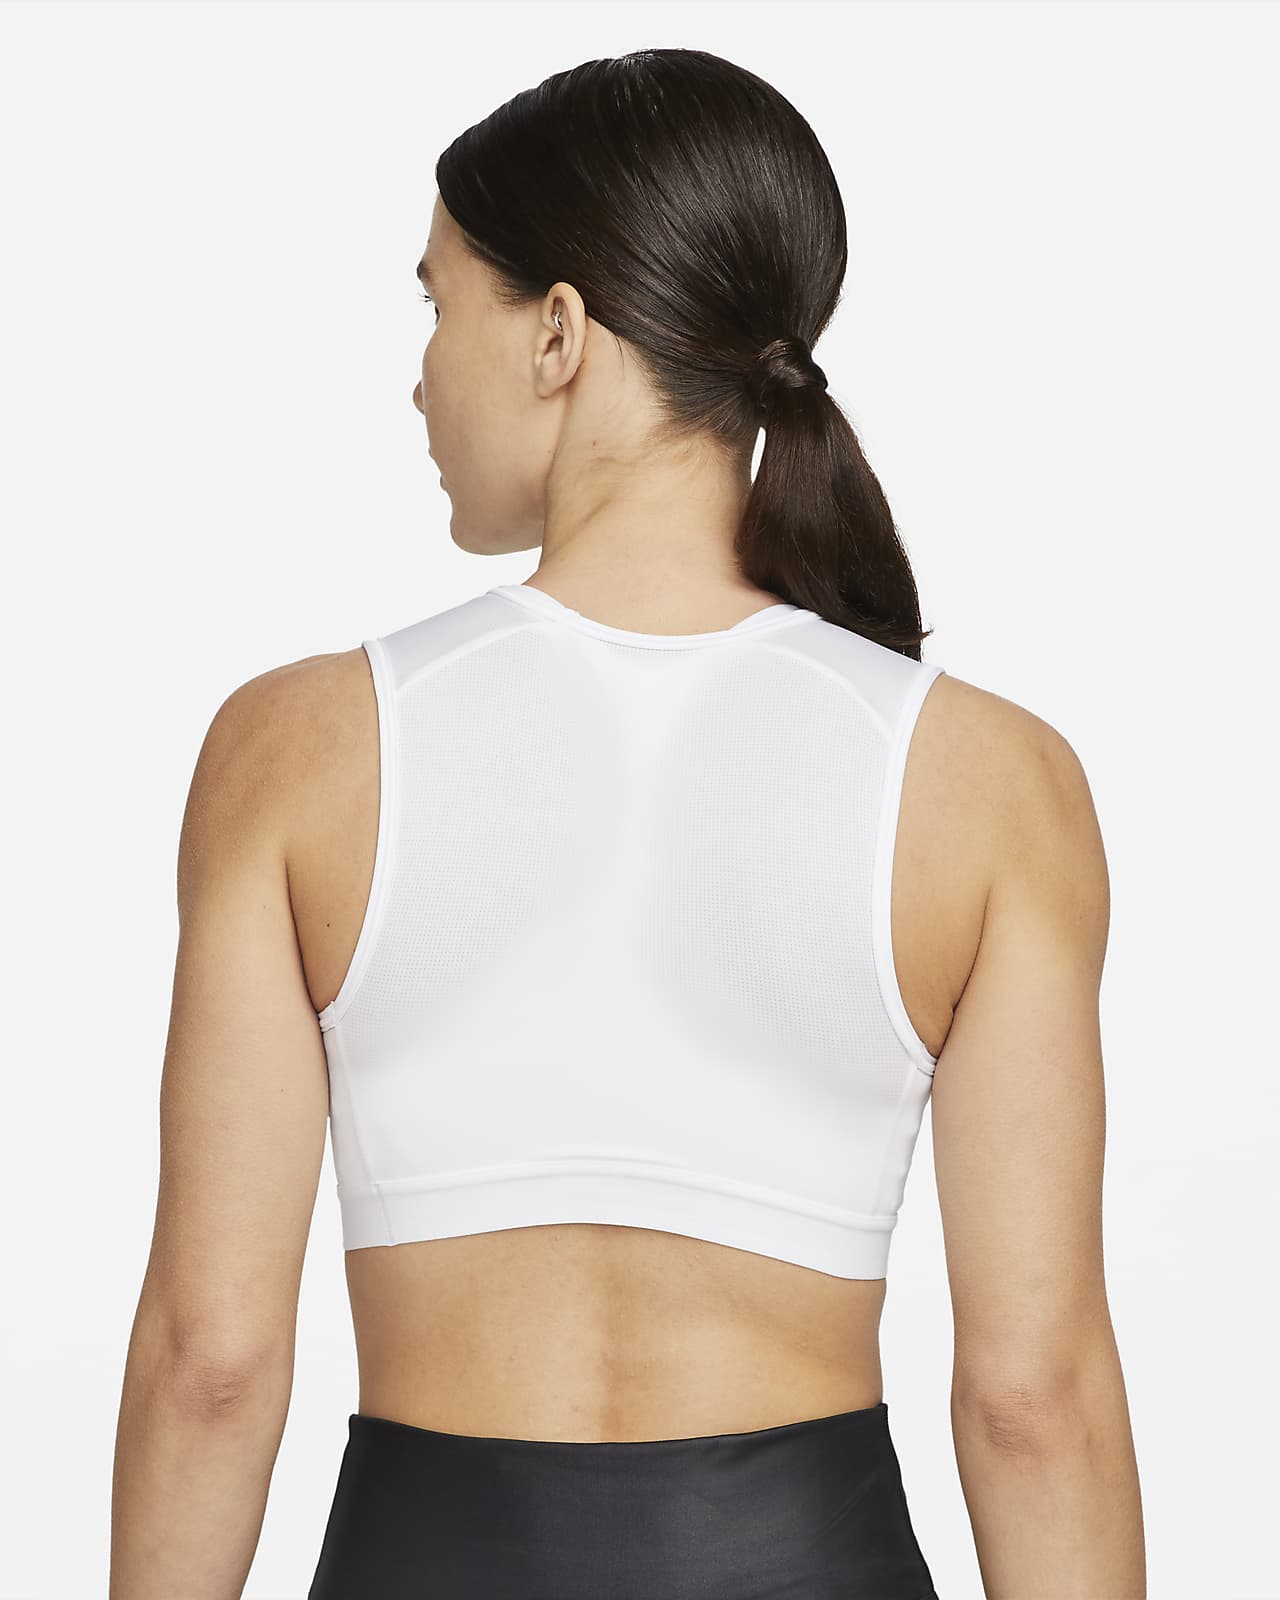 Buy Nike Swoosh High Support Women's Non-Padded Adjustable Sports Bra  (DX6815) from £28.43 (Today) – Best Deals on